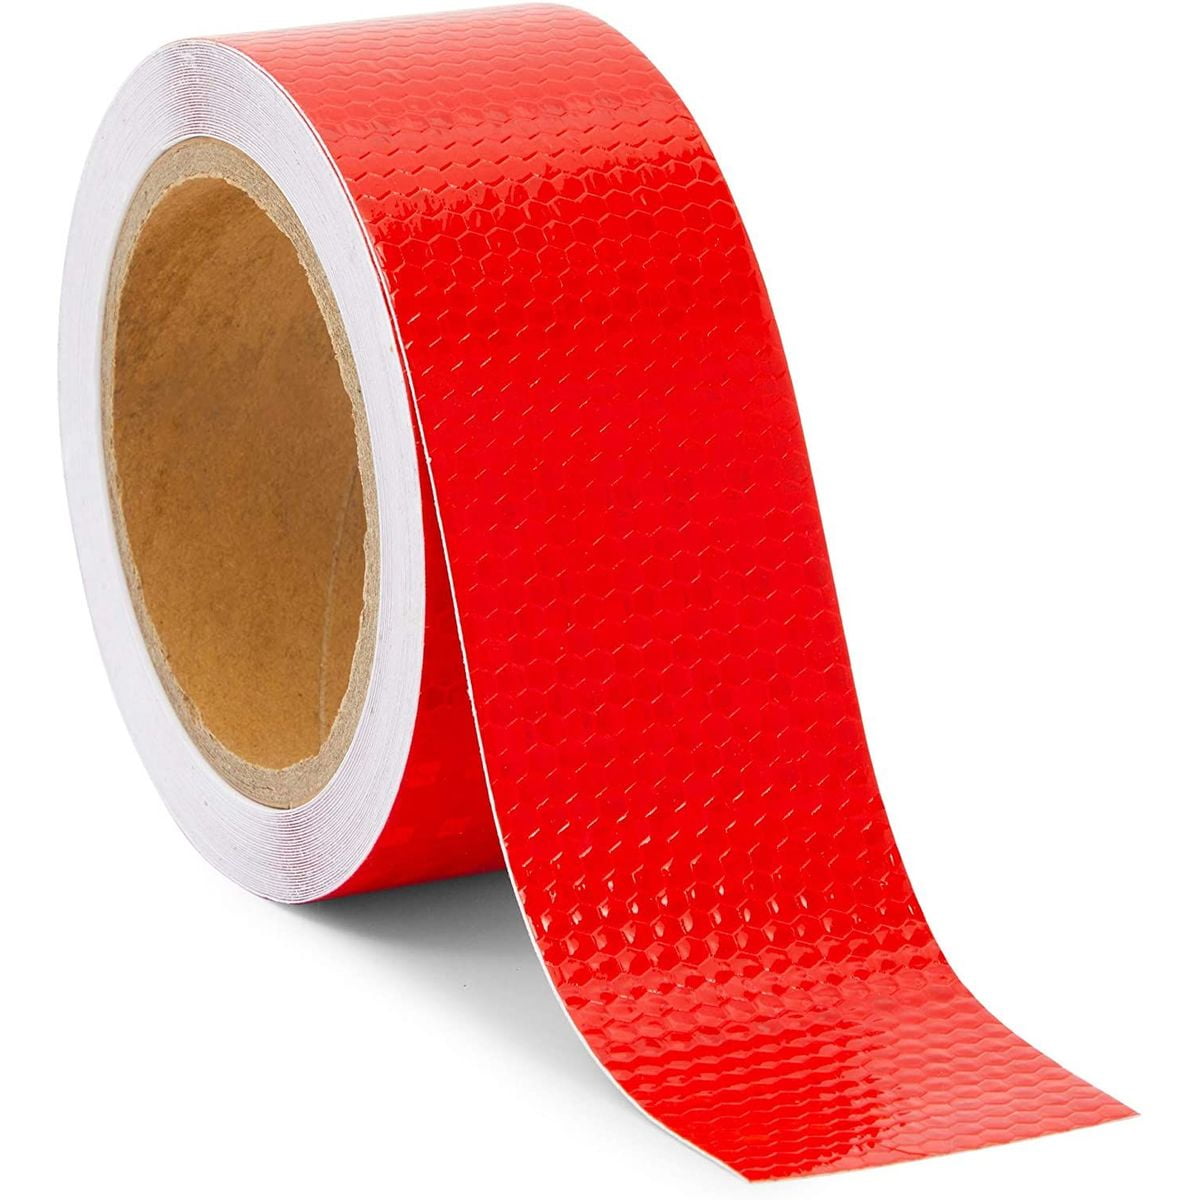 Caution Reflective Tape Safety Warning Tape Sticker adhesive tape Decor Fast shi 